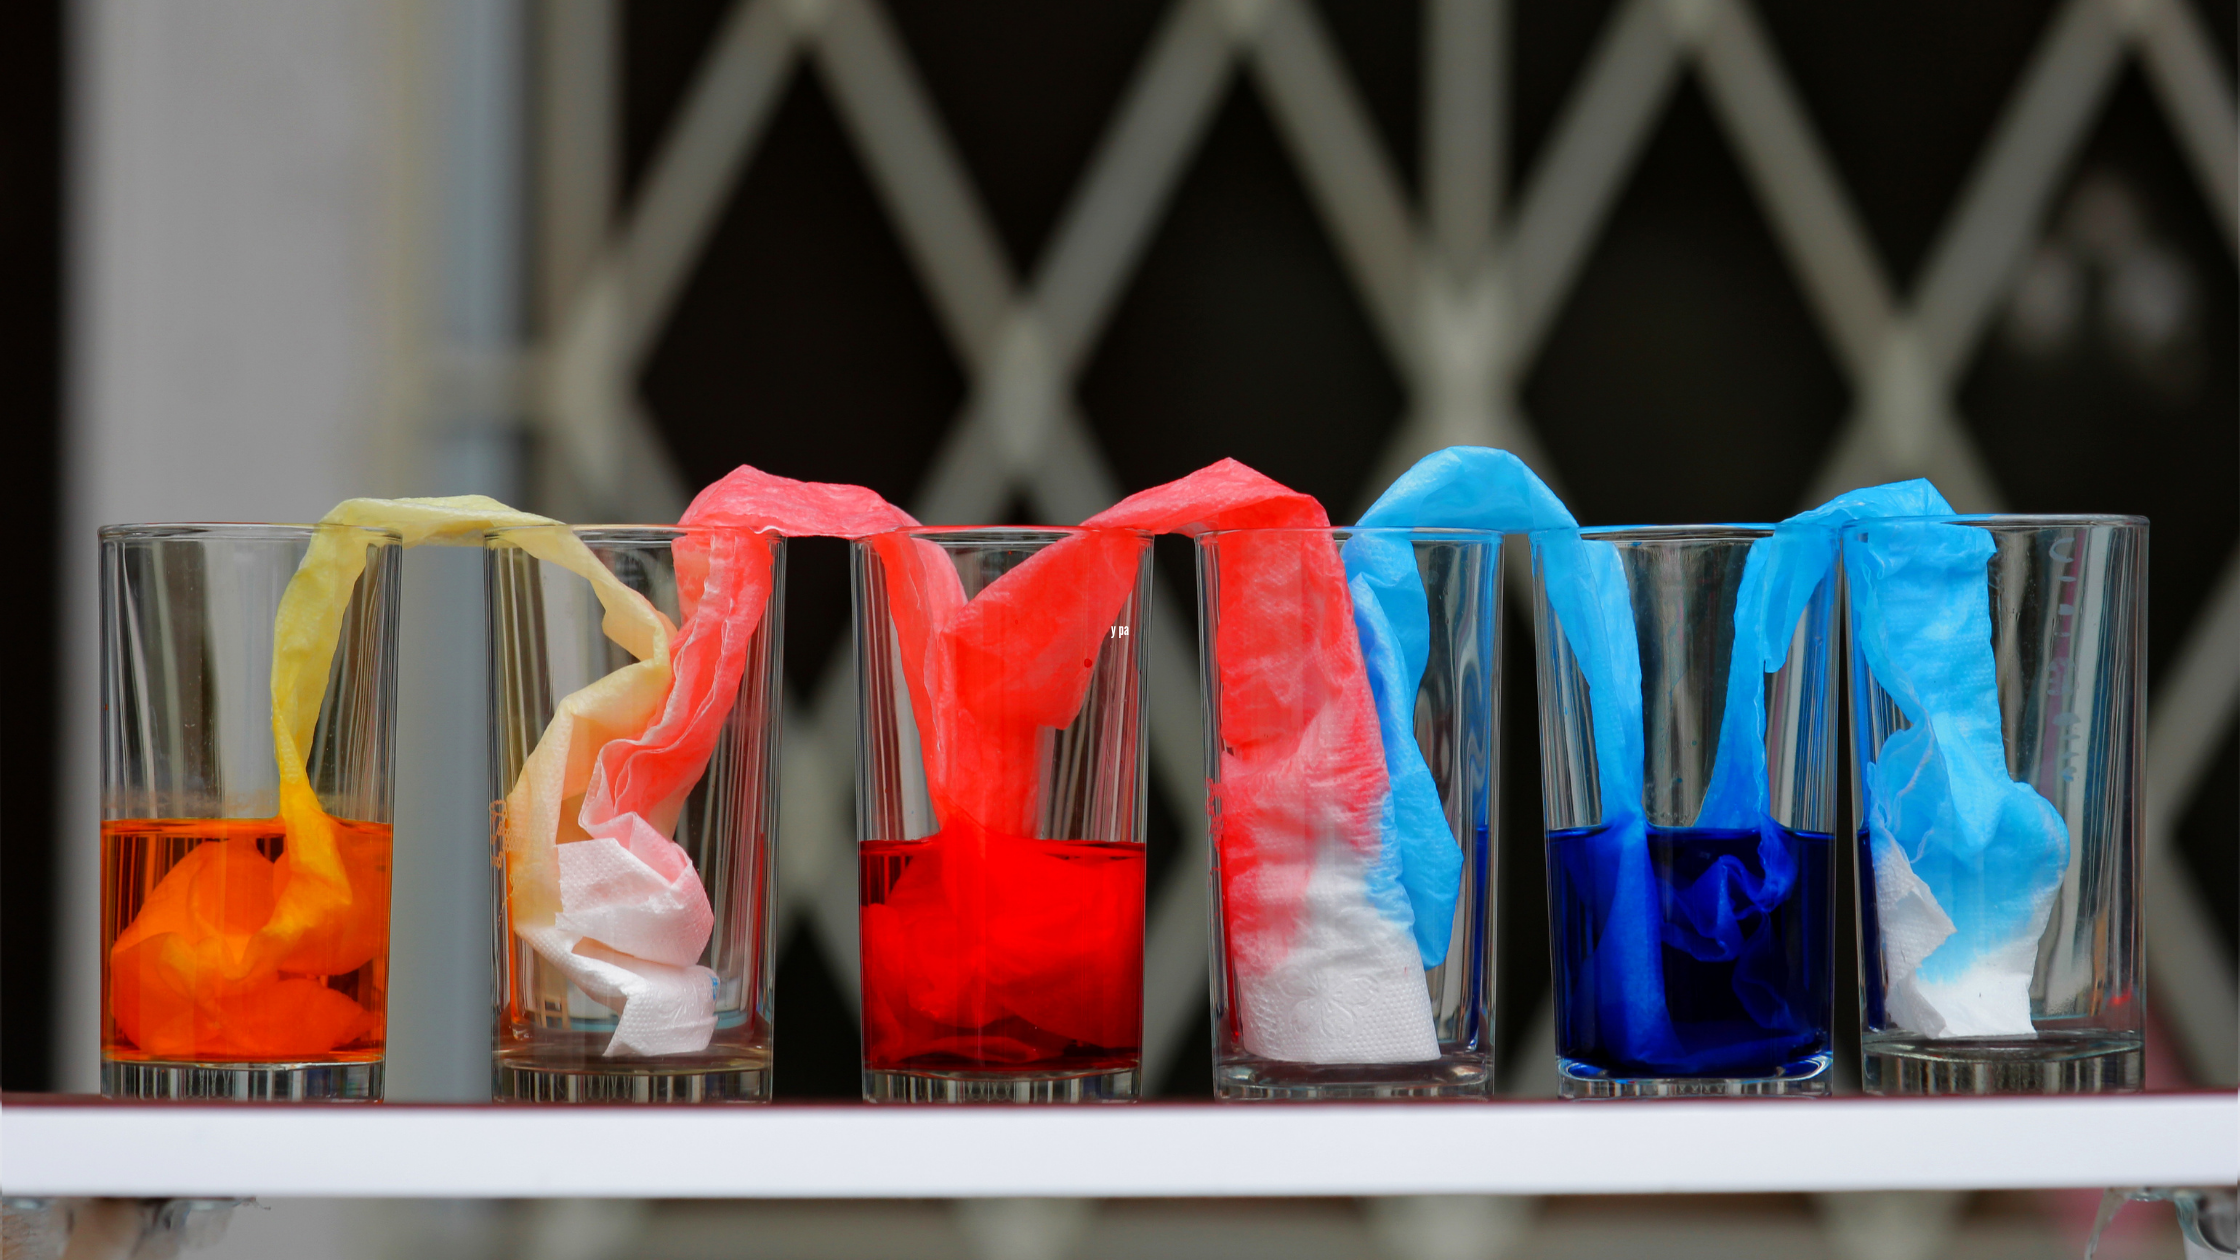 5 Fun & Cool Science Activities with Dye to Do With the Kids 27